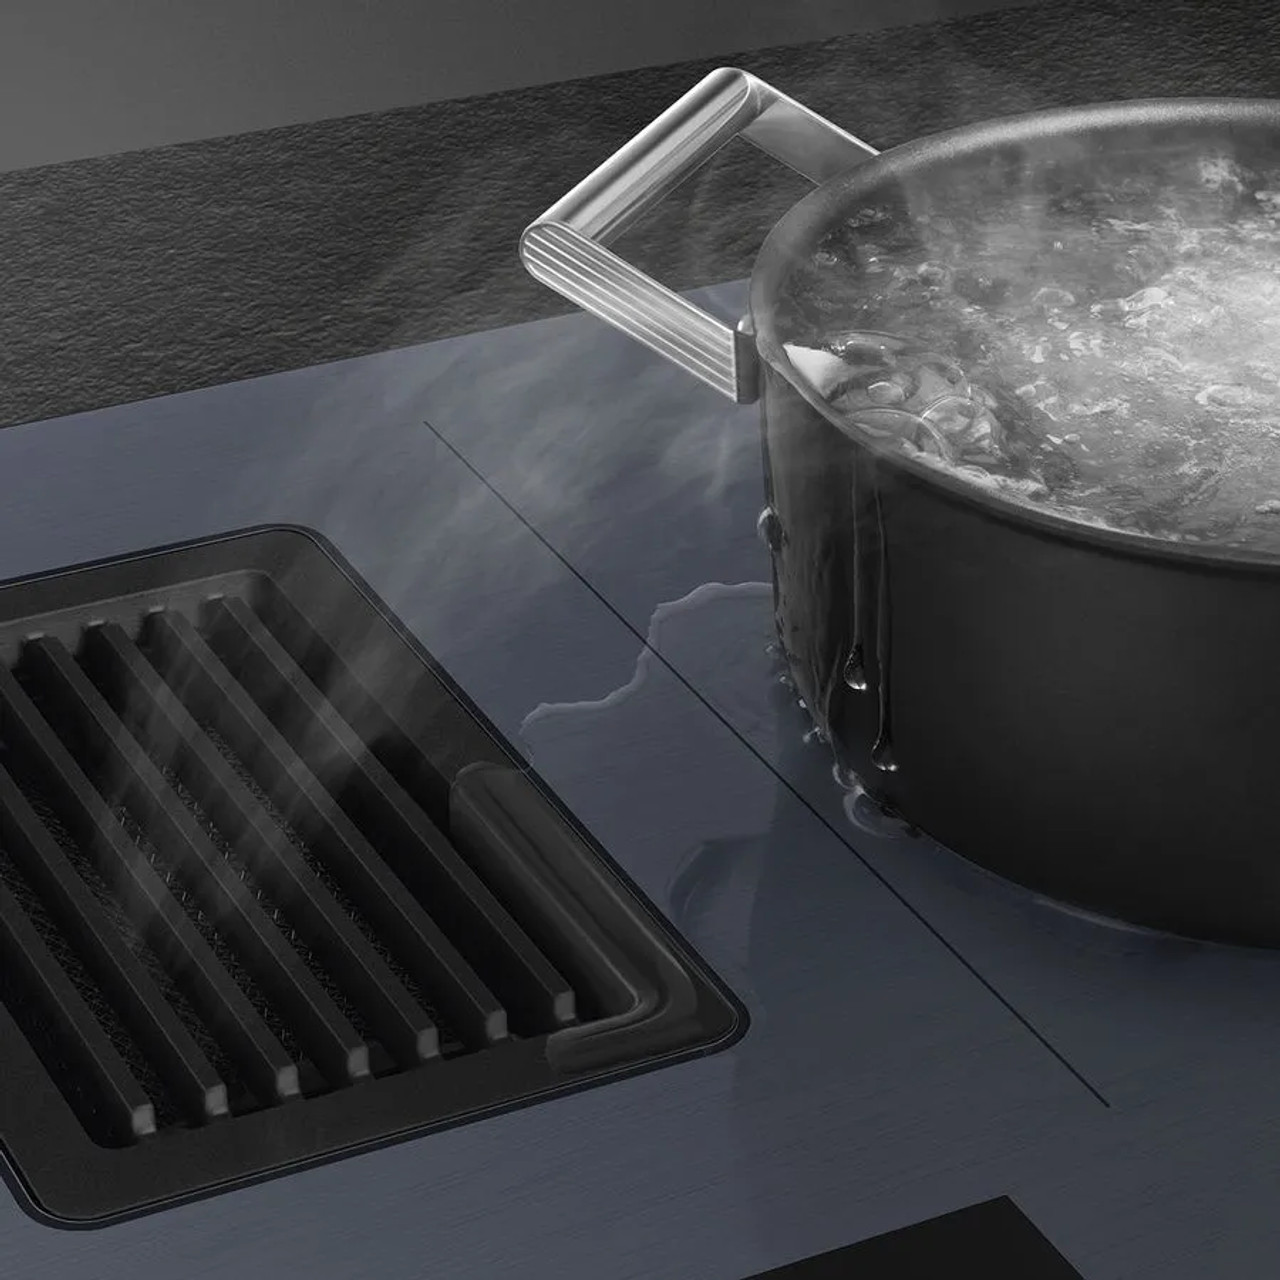 Linea Integrated Induction Cooktop Neptune Grey